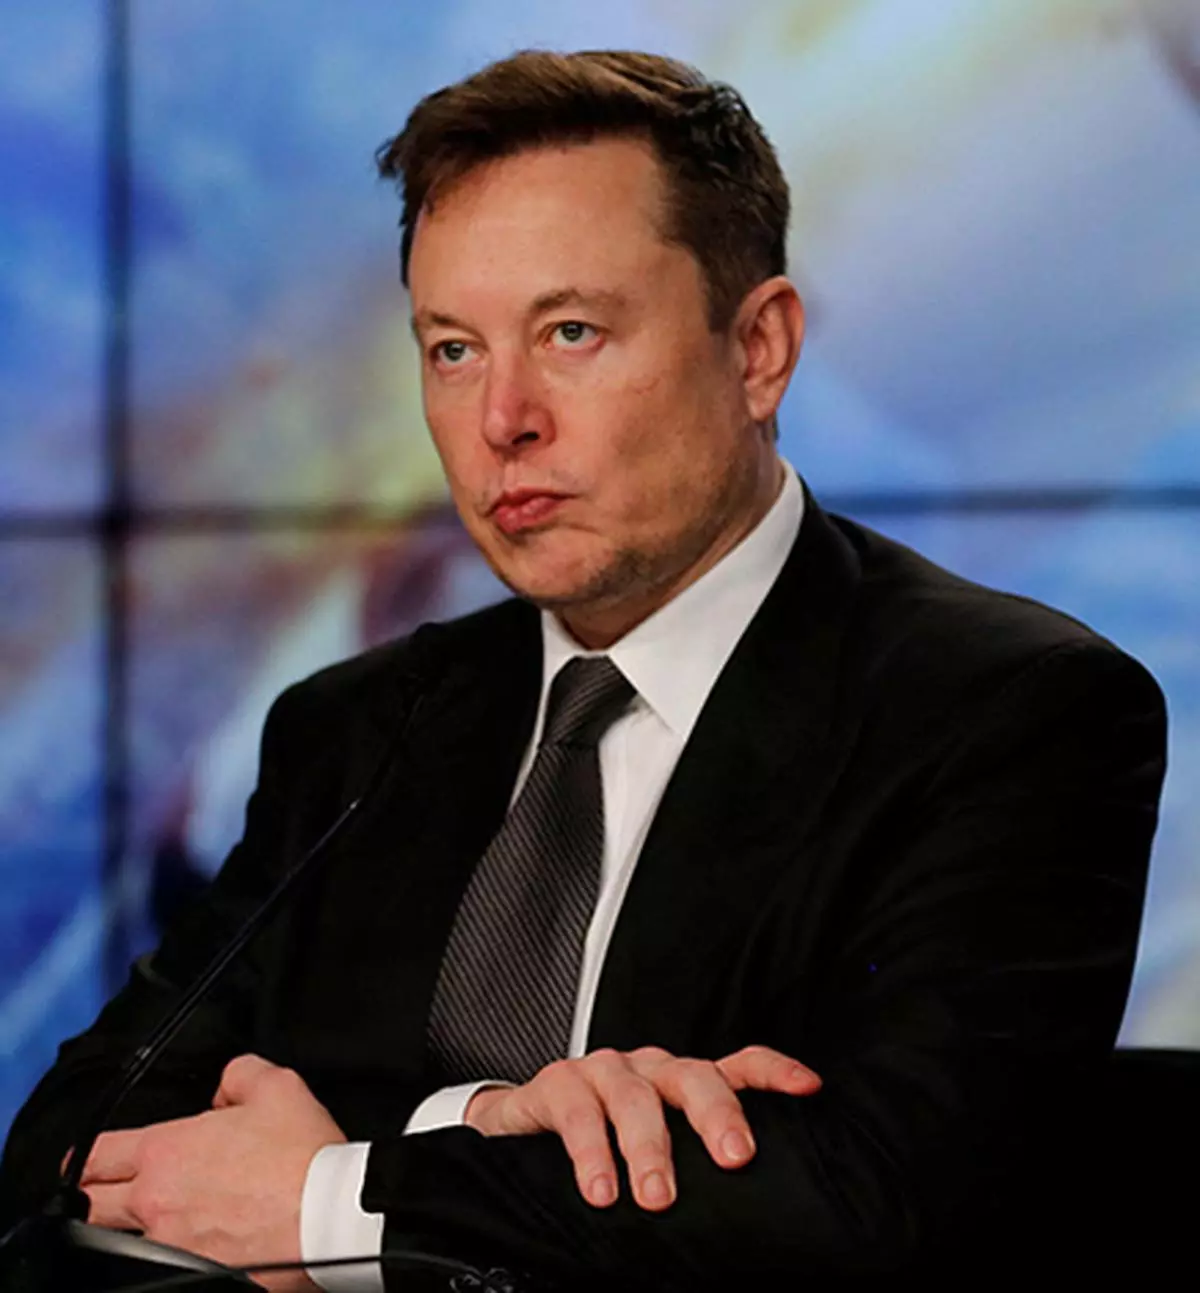 FILE PHOTO:  Elon Musk has tweeted that his satellite Internet firm Starlink would seek permission to operate in Iran